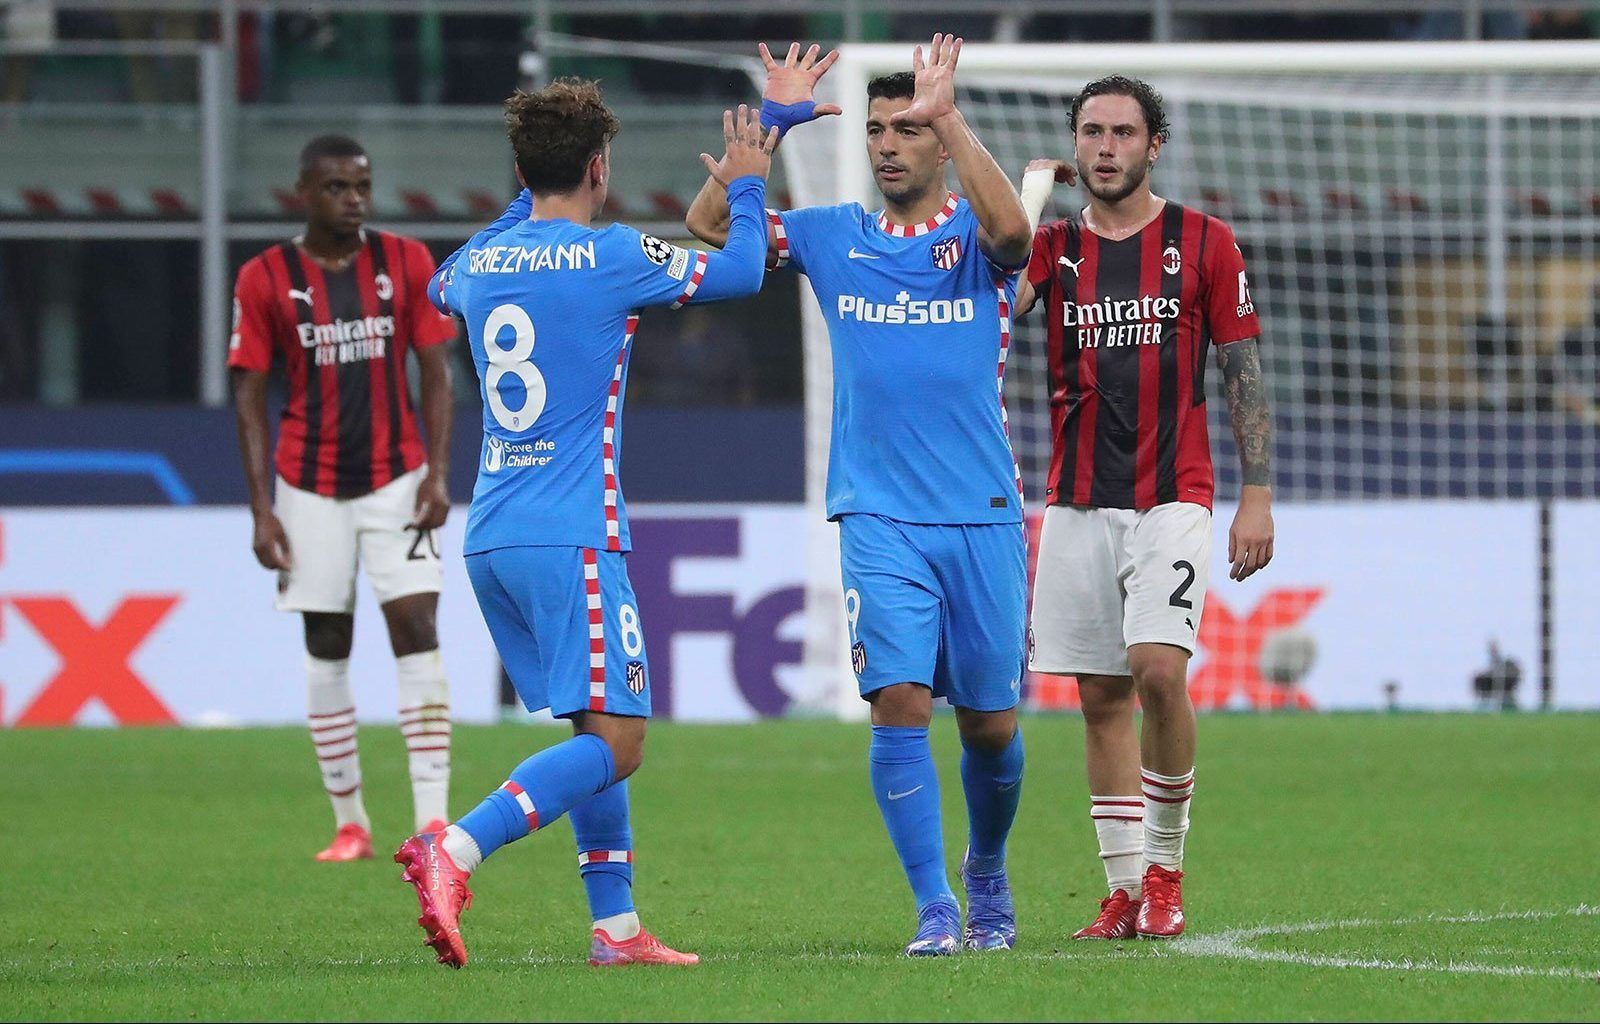 AC Milan were defeated 2-1 by Atletico Madrid in their first meeting of the season.